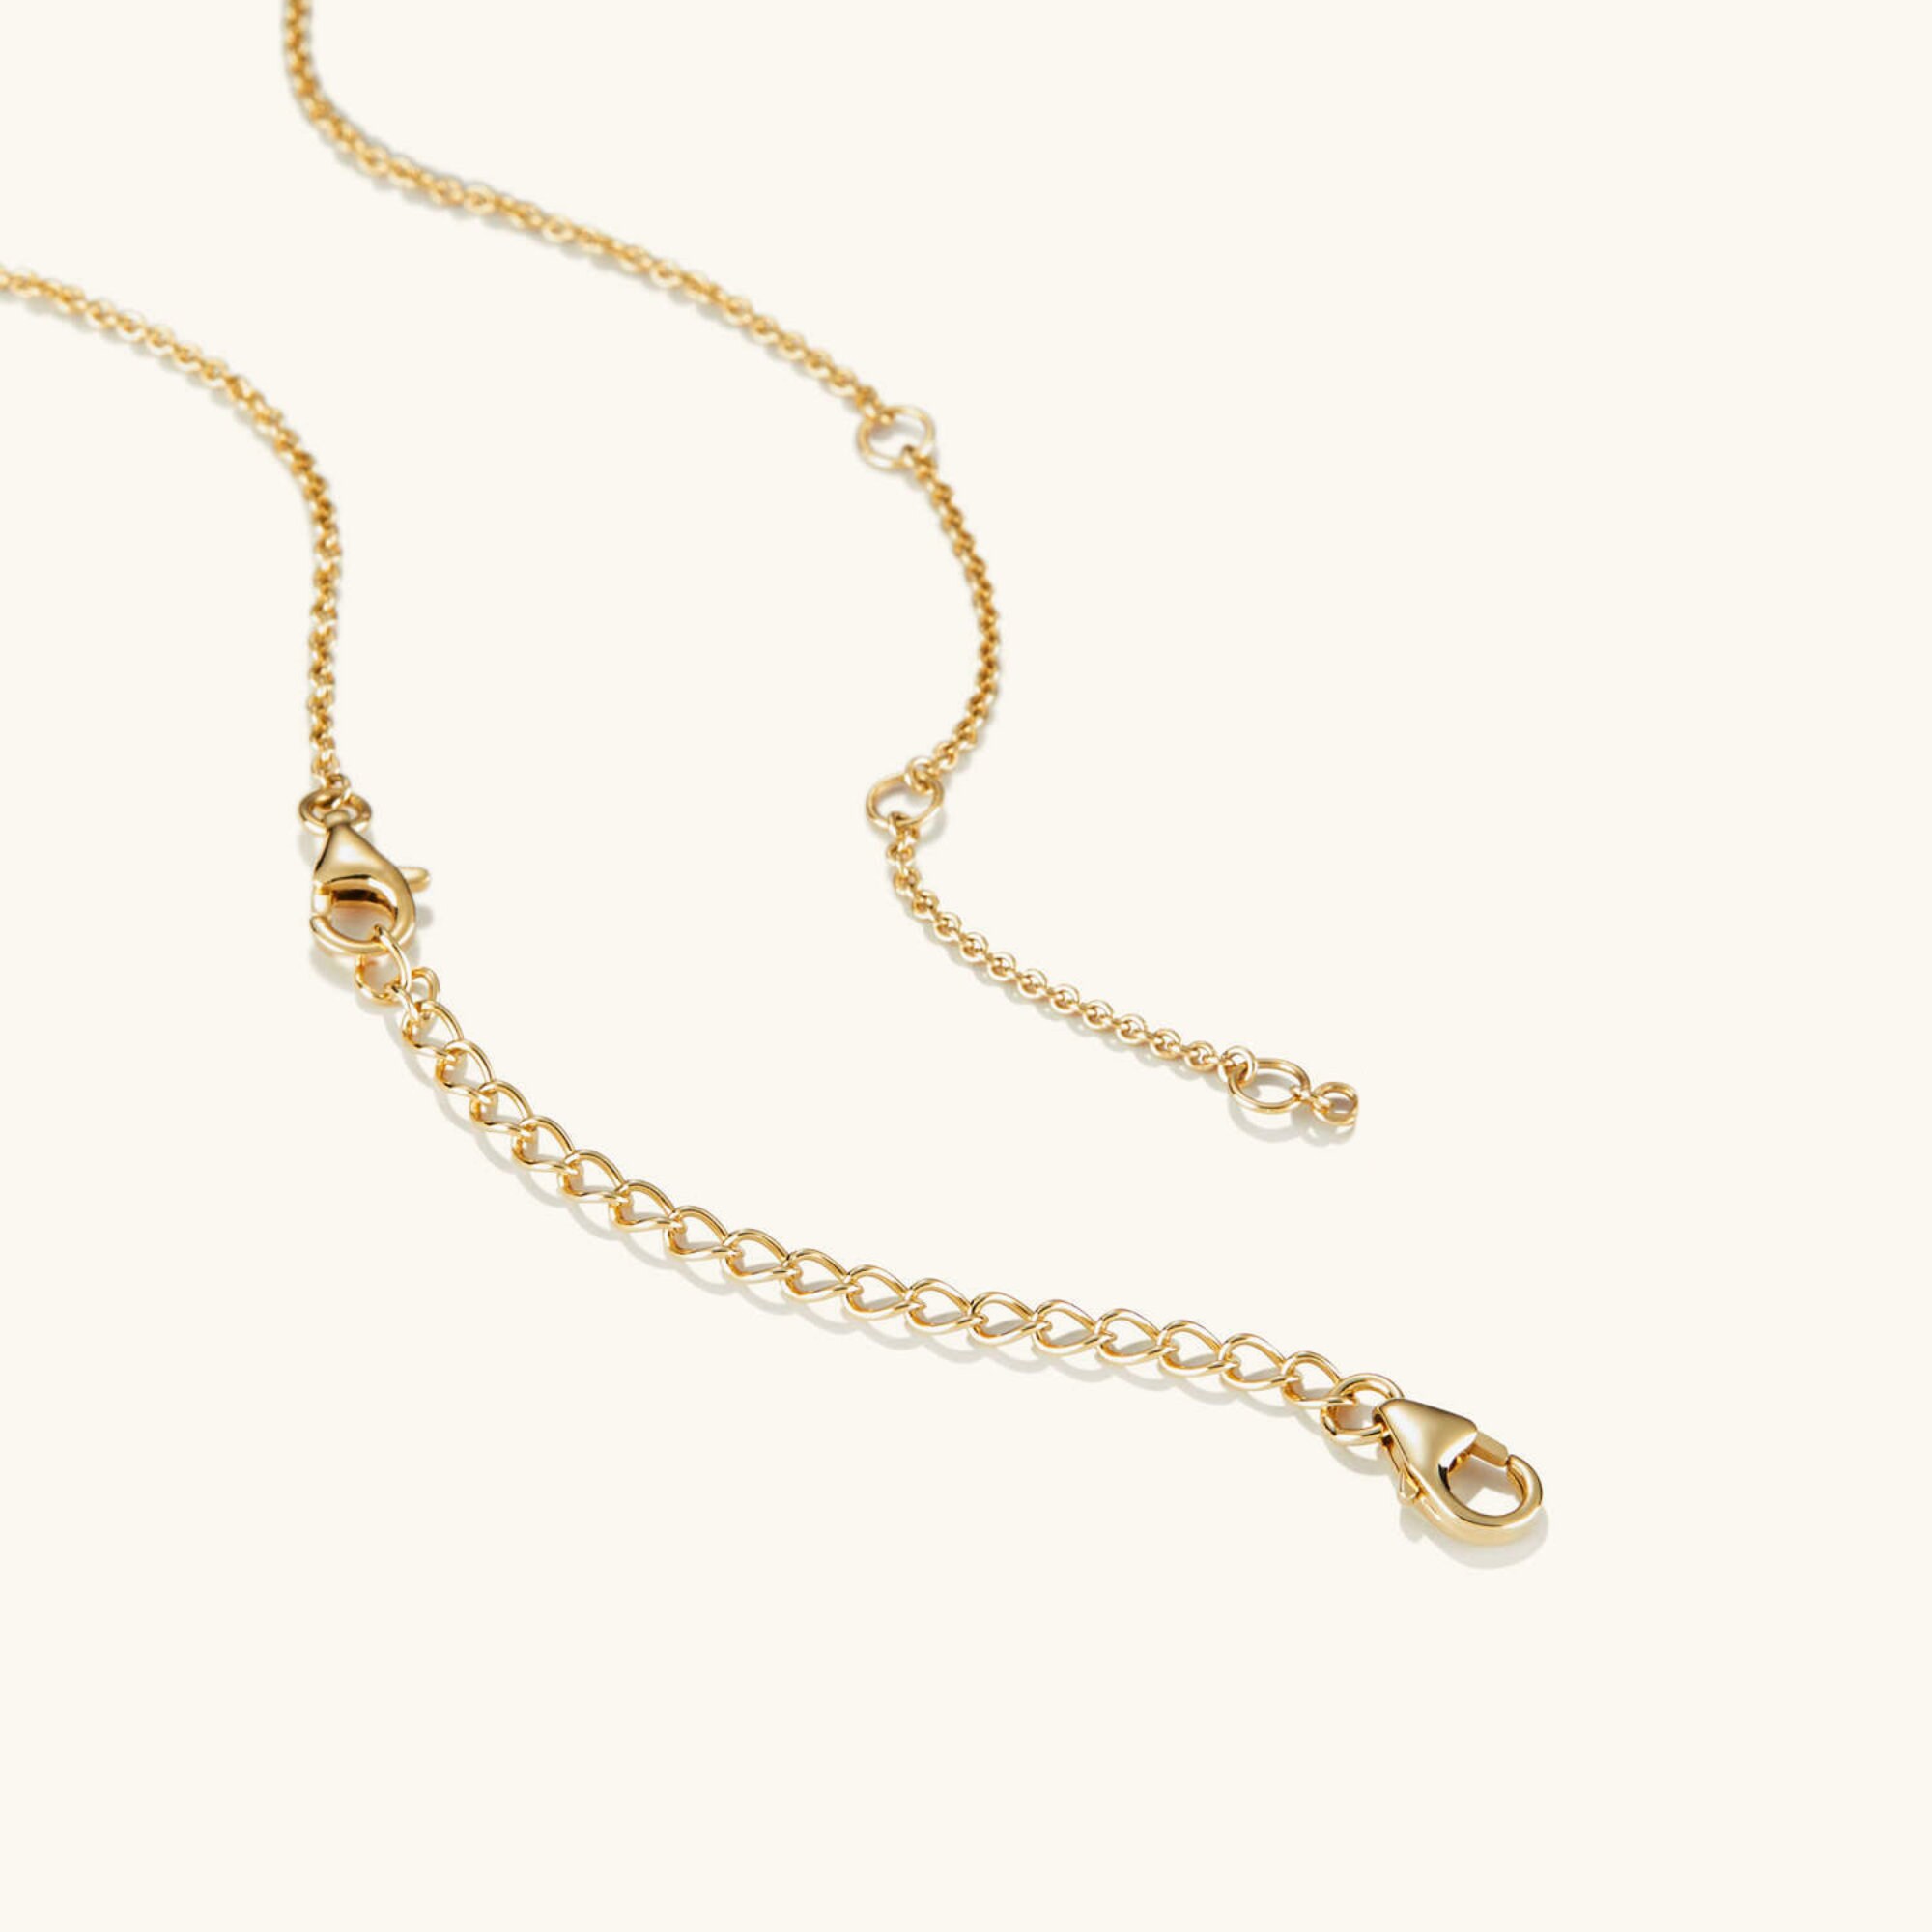 14K ROSE GOLD FILLED 1 2 3 4 Inches Extension Chain Add to Your Necklace or  Bracelet Spring Clasp Necklace Extender Chain 